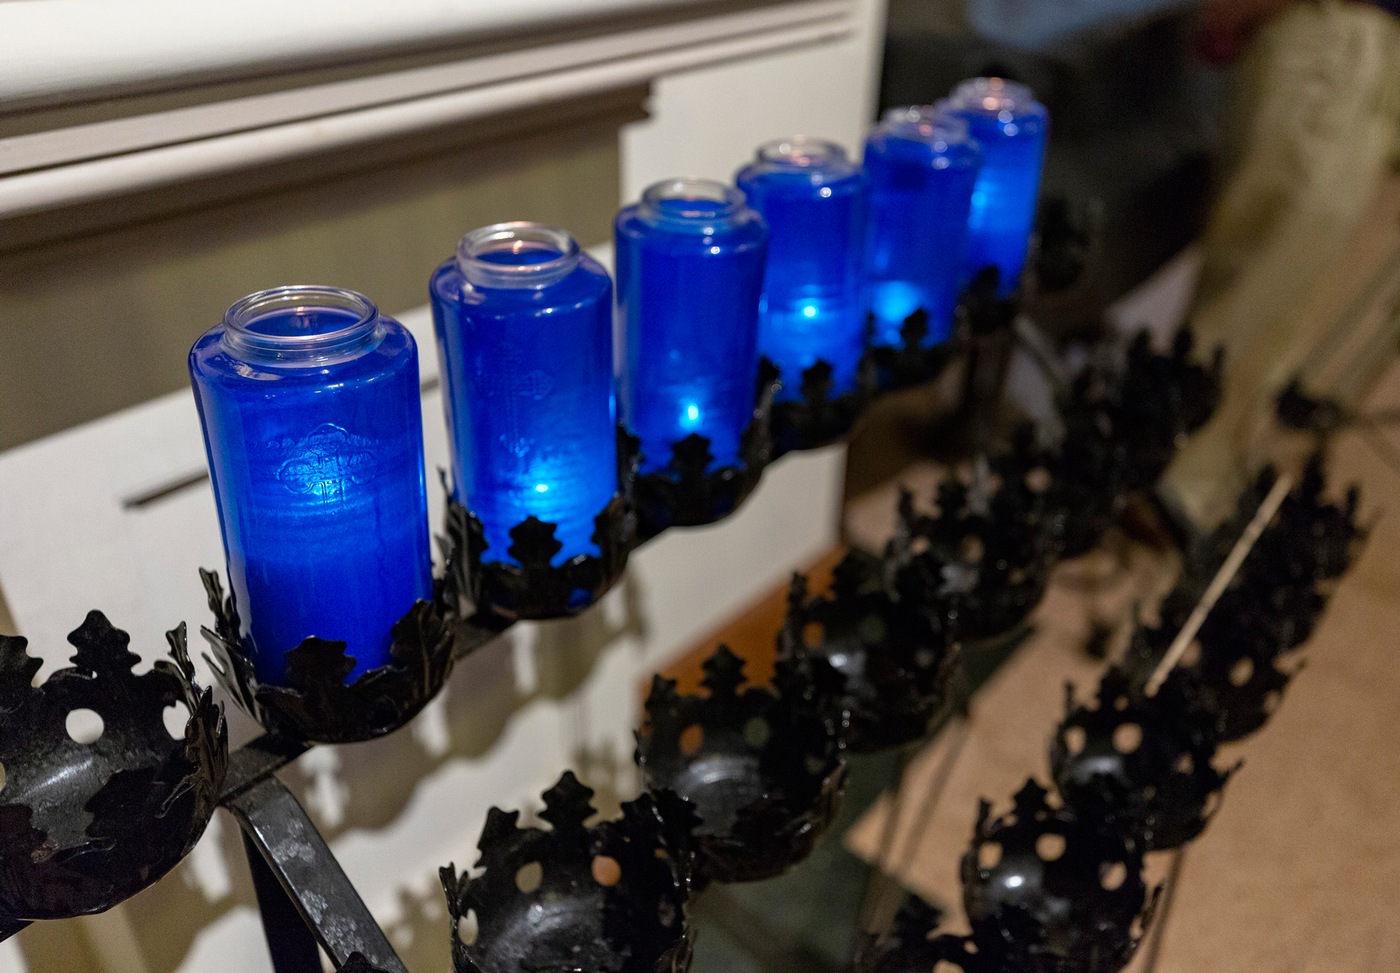 Candles are lit on May 7, 2019, at St. Patrick’s Church in Washington, D.C., as part of the annual Blue Mass observance honoring fallen officers in advance of National Police Week.